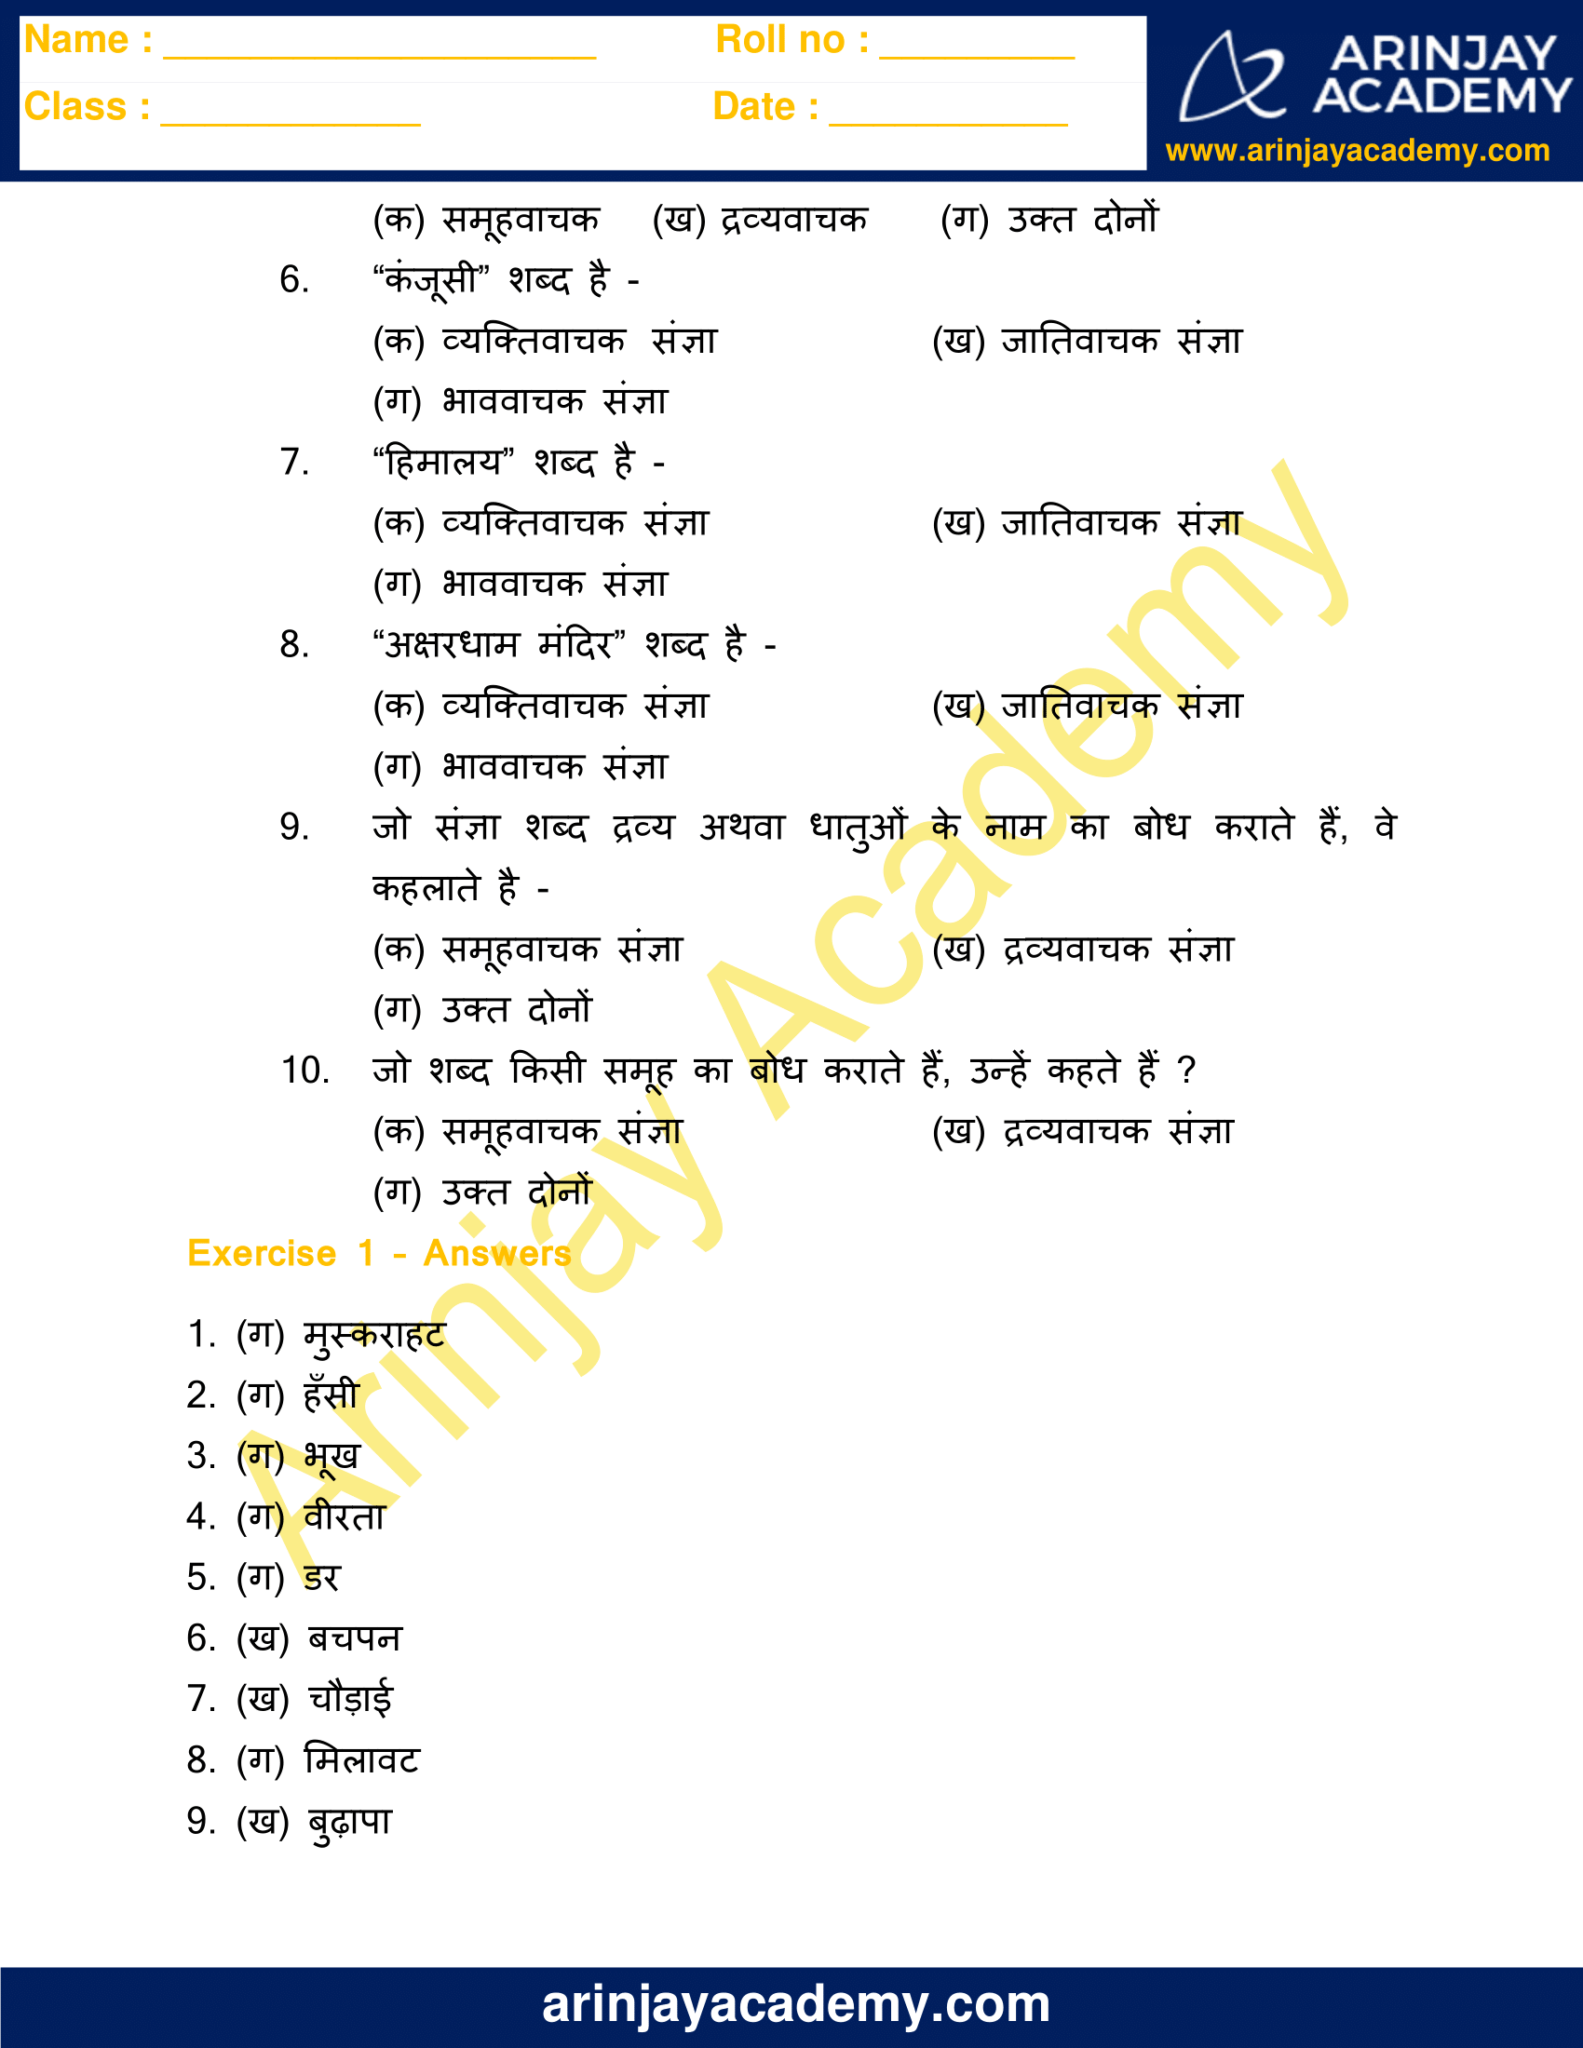 sangya worksheet for class 5 free and printable arinjay academy